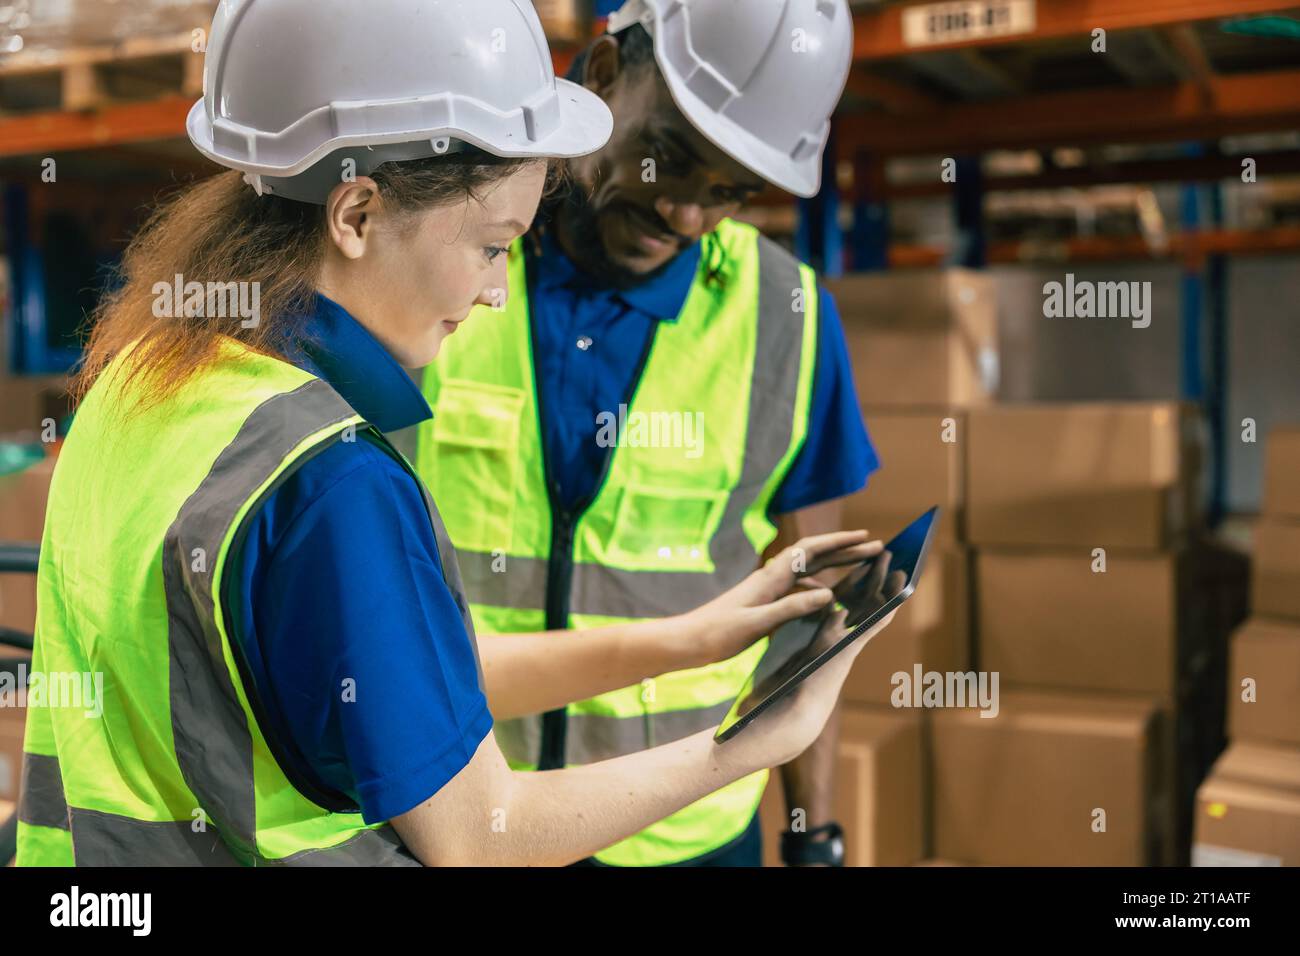 Warehouse cargo team training new staff using inventory management technology system in wireless tablet working teamwork together Stock Photo